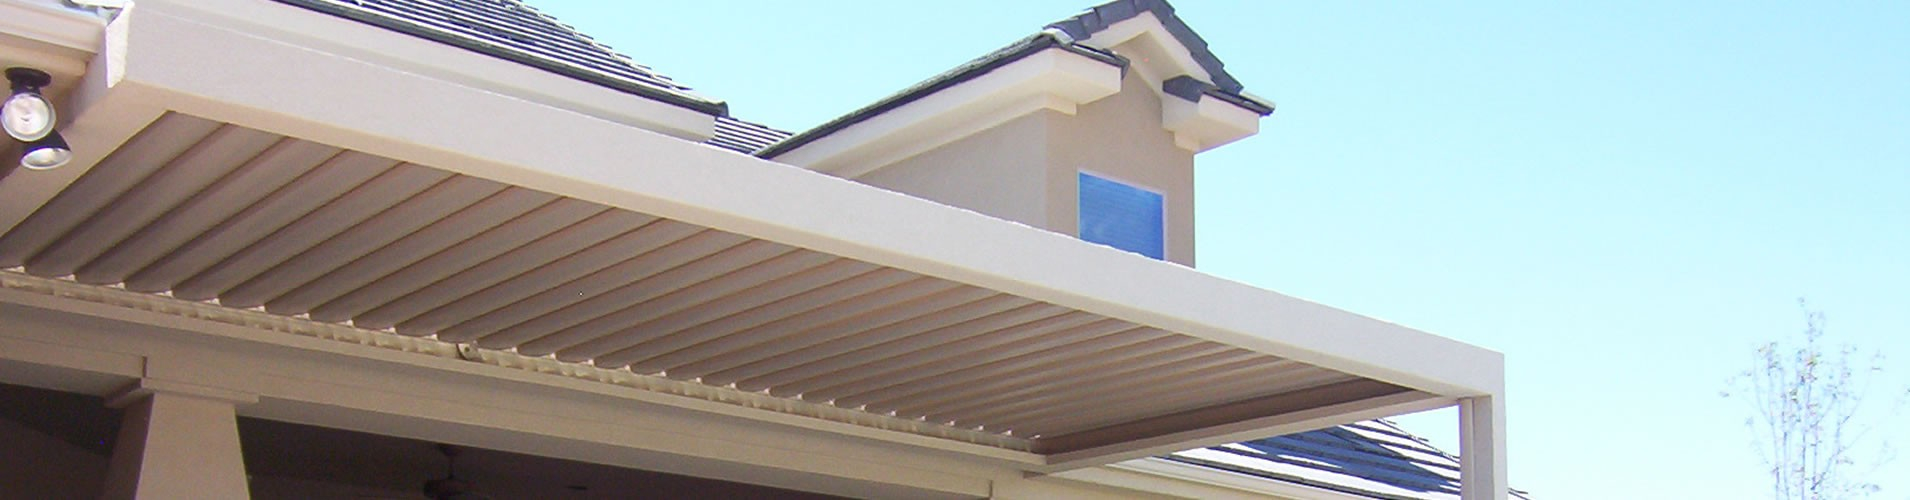 Dallas Patio Covers Louvered Roofs Texas Patio Systems for dimensions 1910 X 500